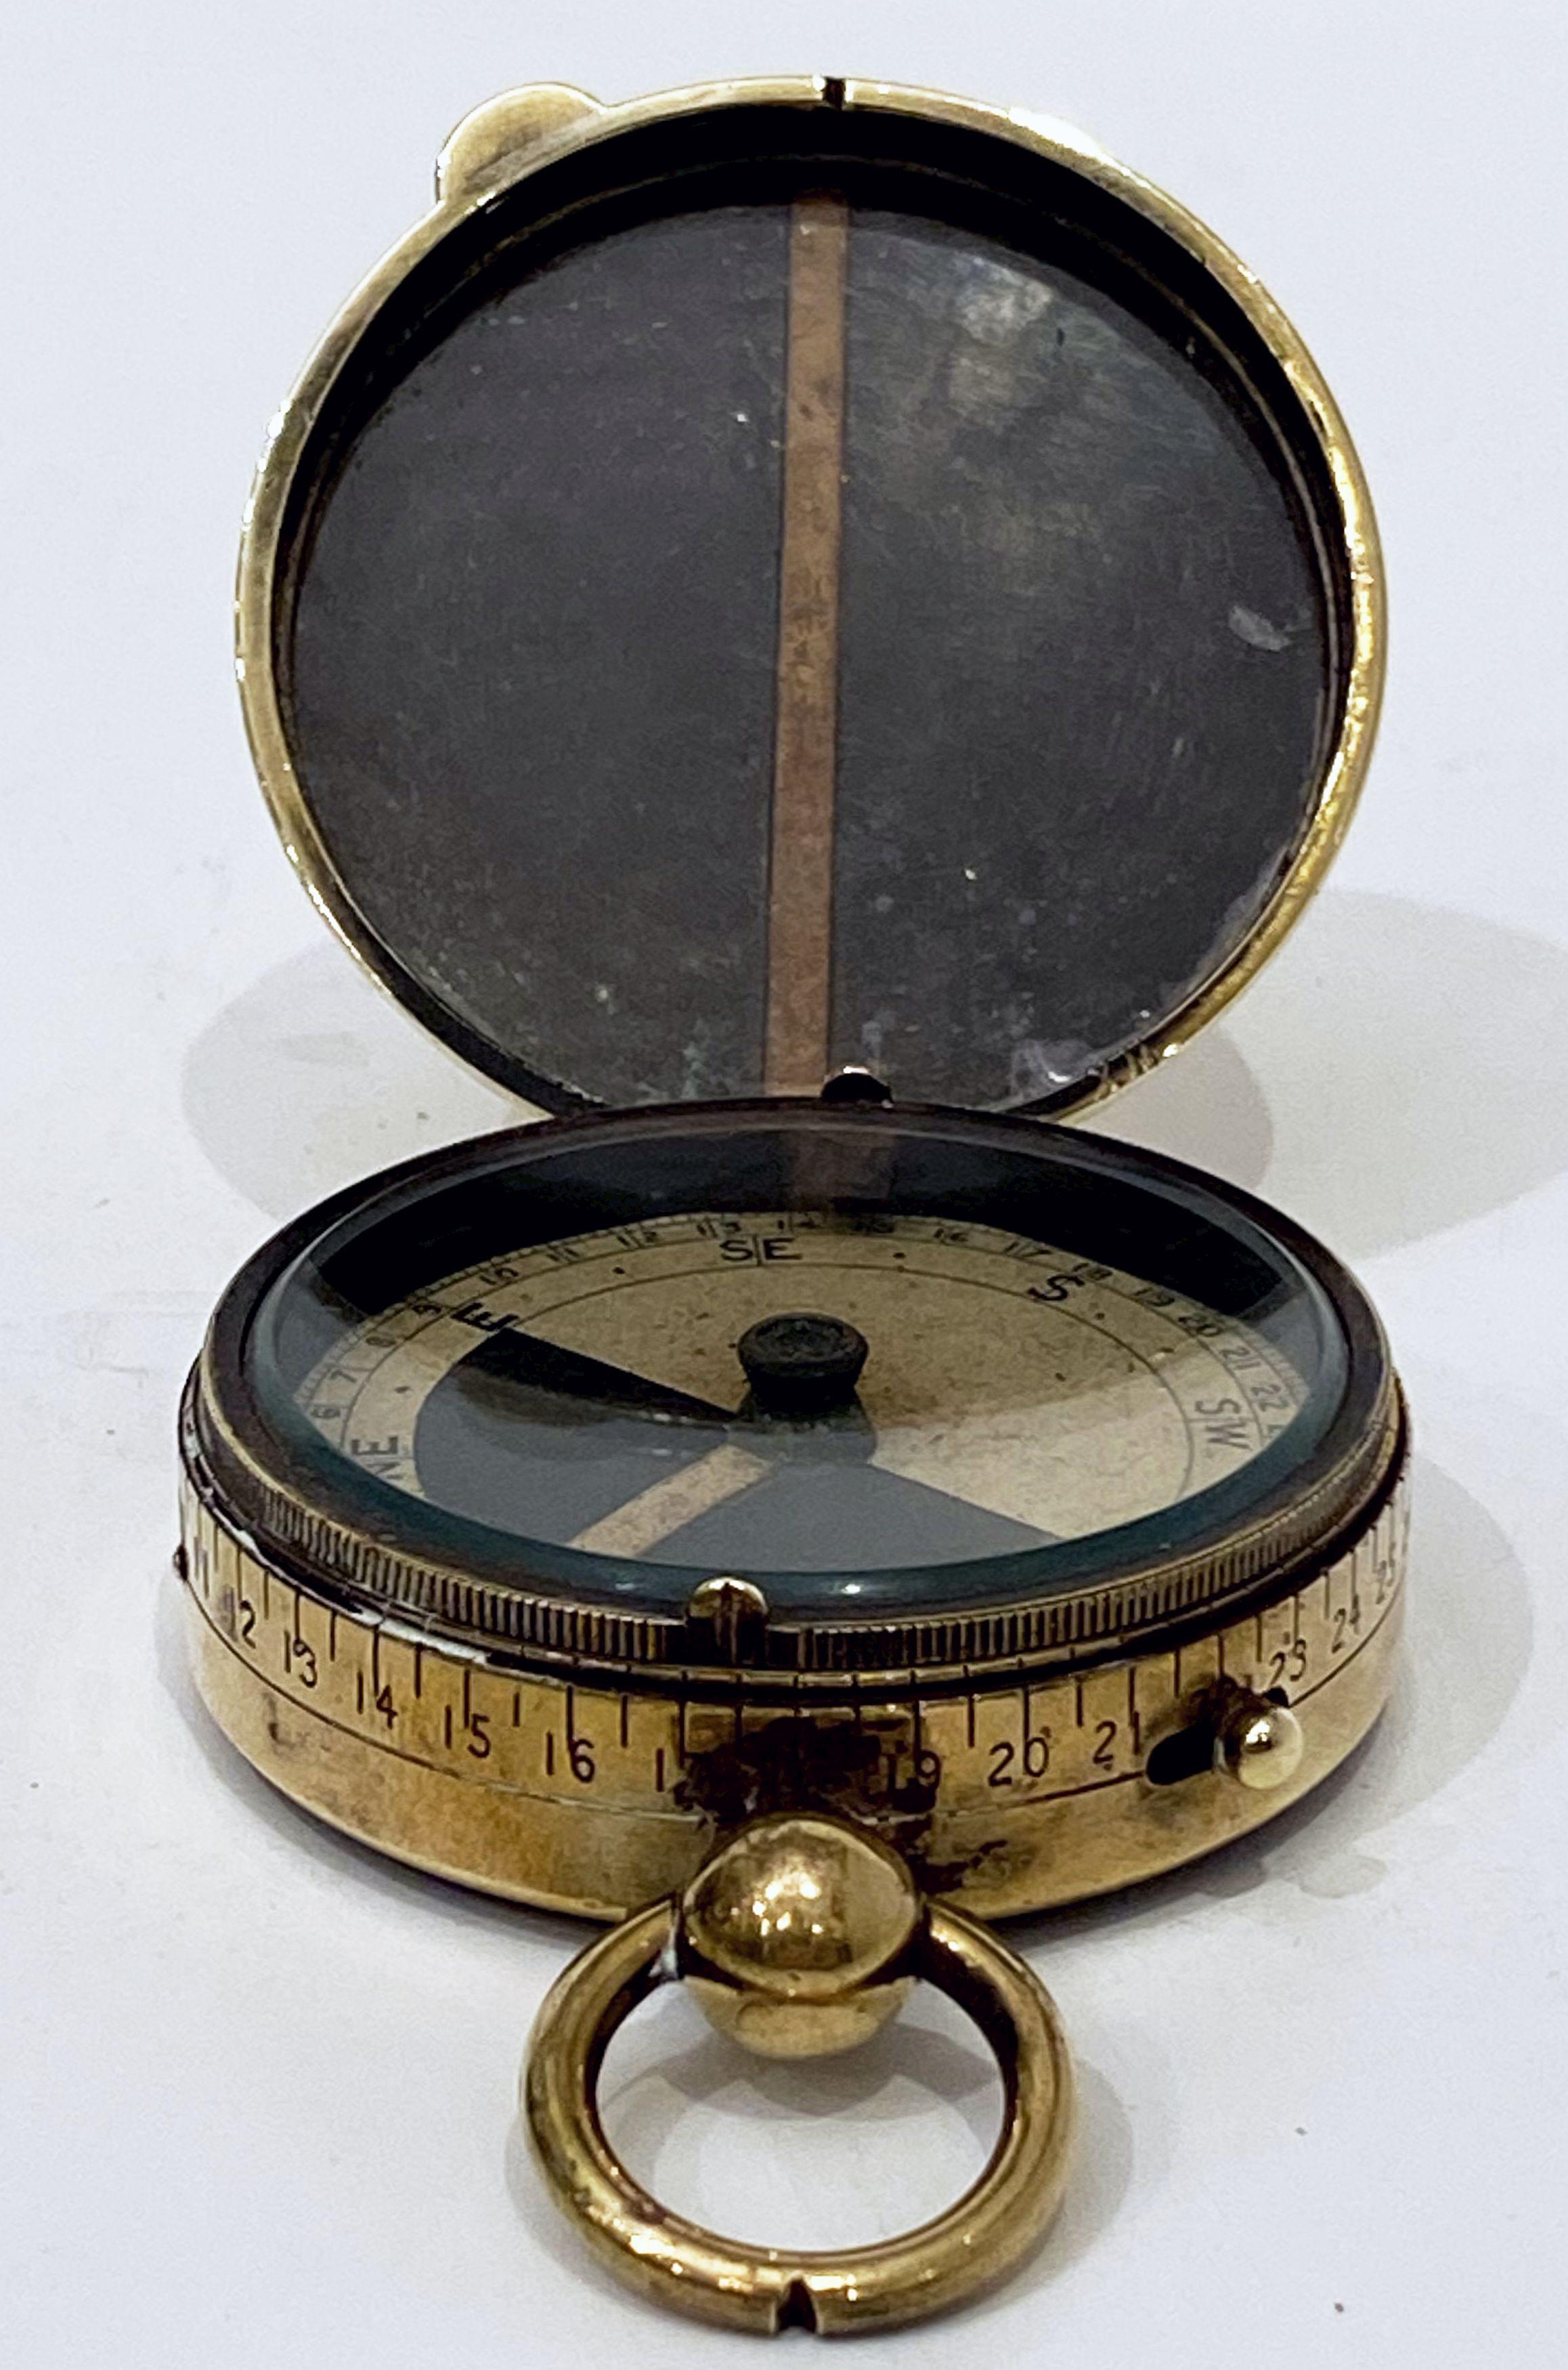 WWI Military Officer's Marching Compass, Cbynite Radium Compass 7